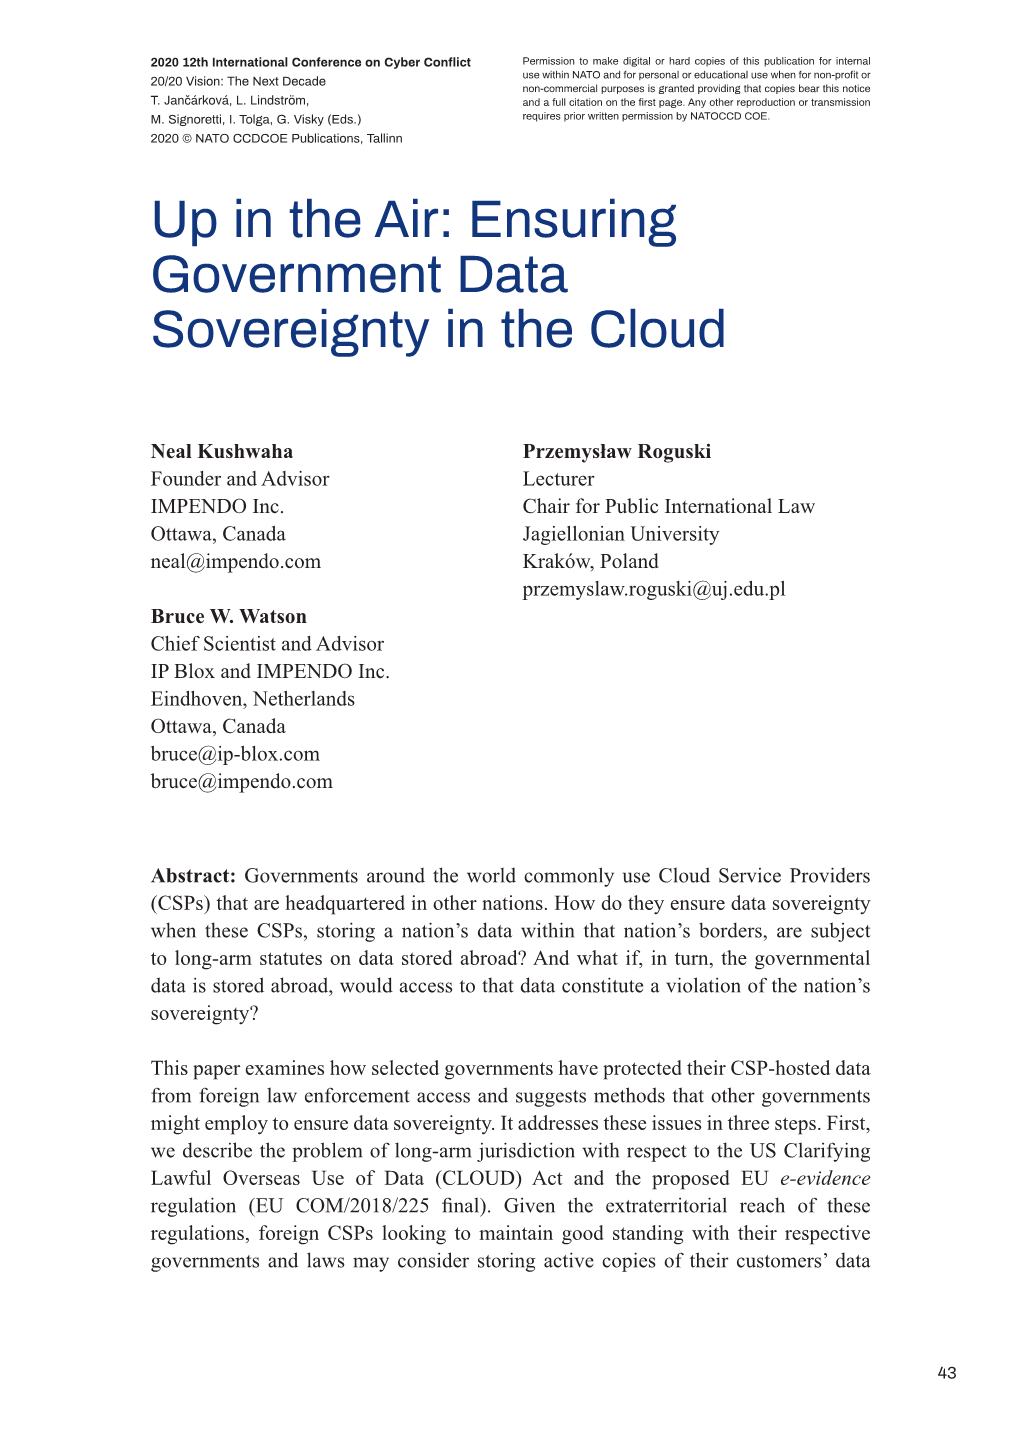 Up in the Air: Ensuring Government Data Sovereignty in the Cloud